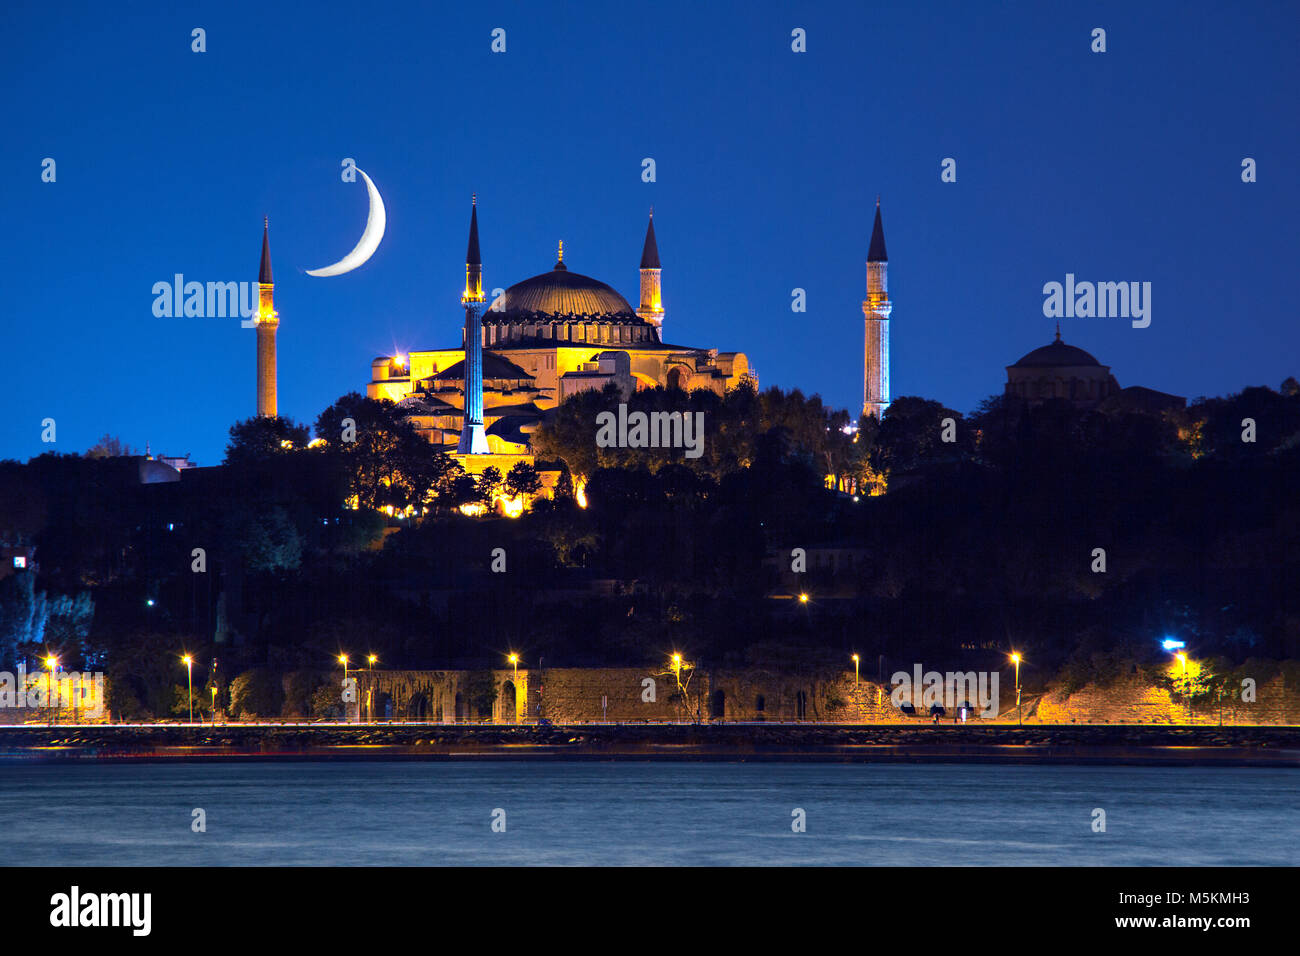 Hagia Sophia at night with crescent moon in the sky, Istanbul, Turkey Stock Photo